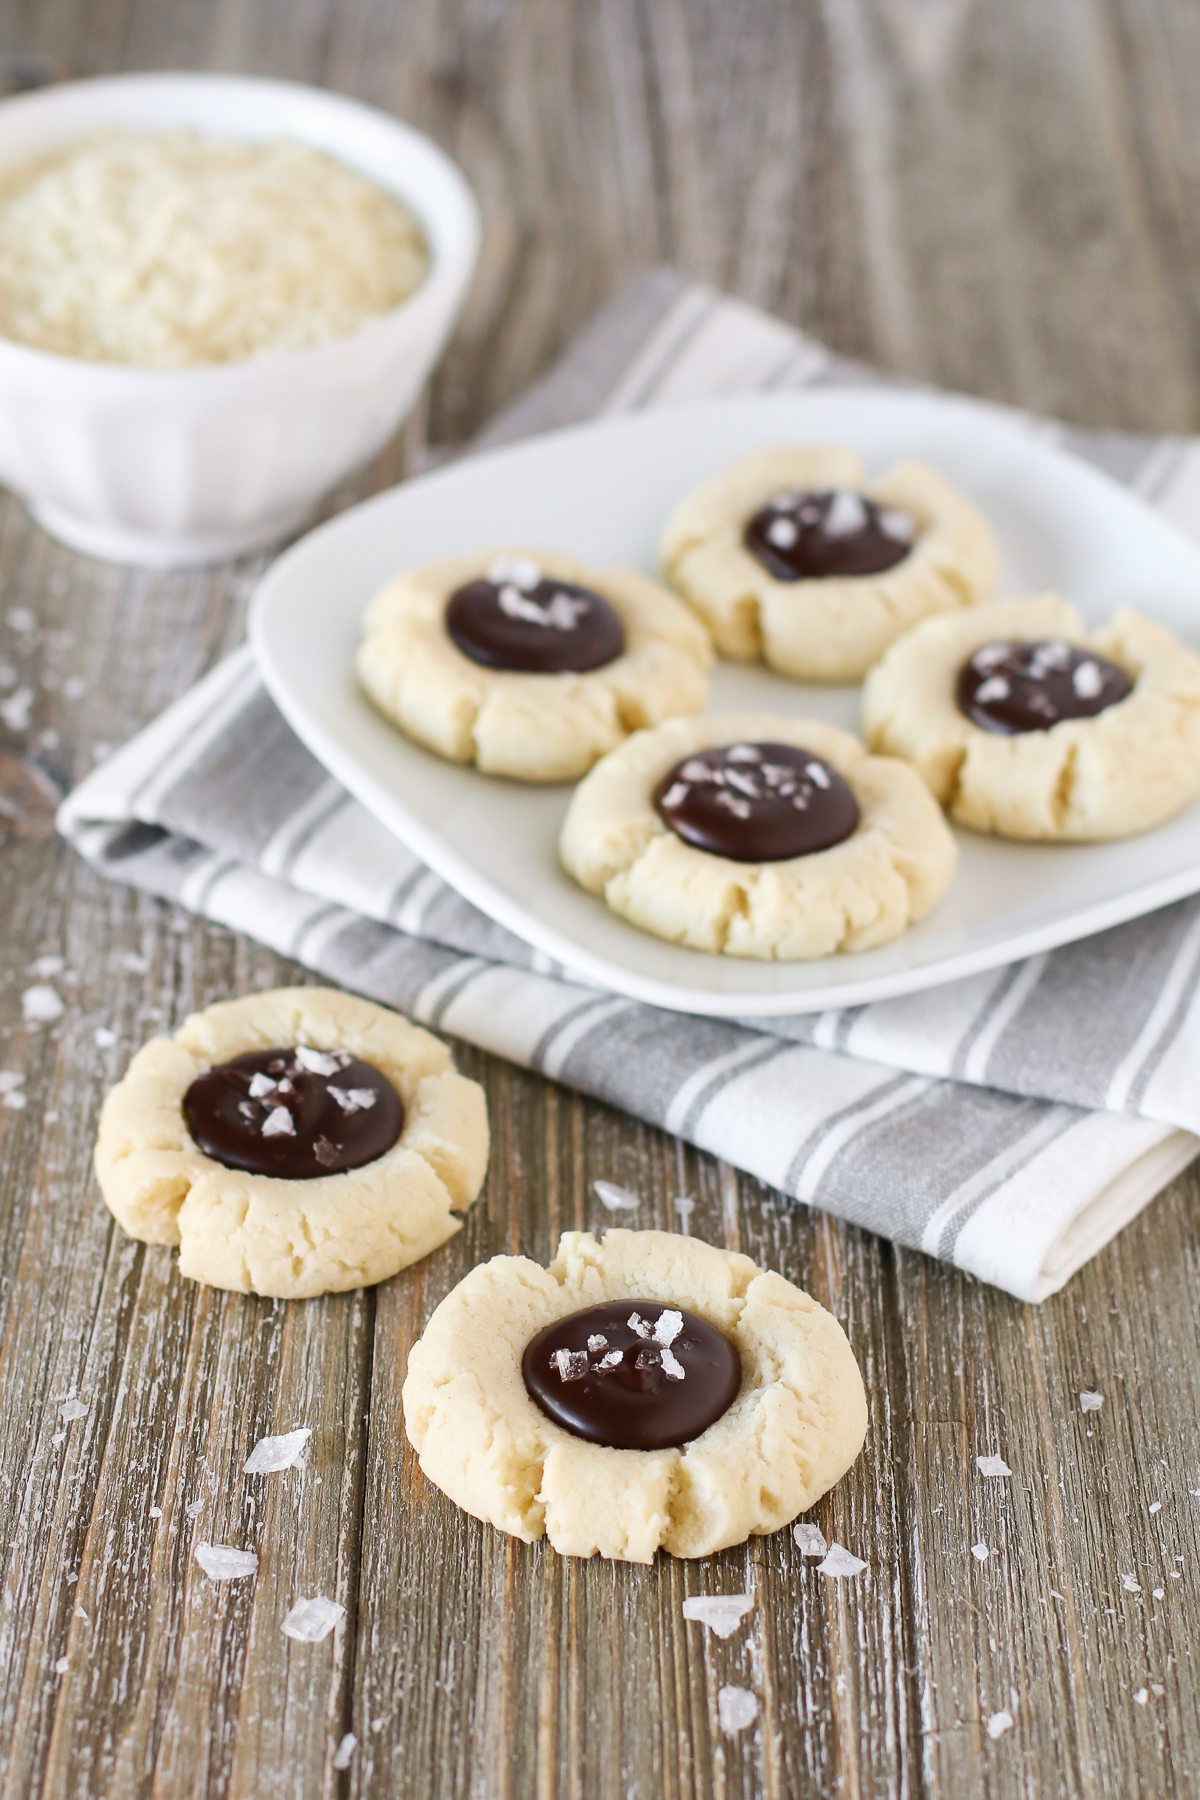 Gluten Free Vegan Salted Chocolate Almond Thumbprint Cookies. Soft almond thumbprint cookies, filled with a decadent chocolate ganache and topped with sea salt flakes.